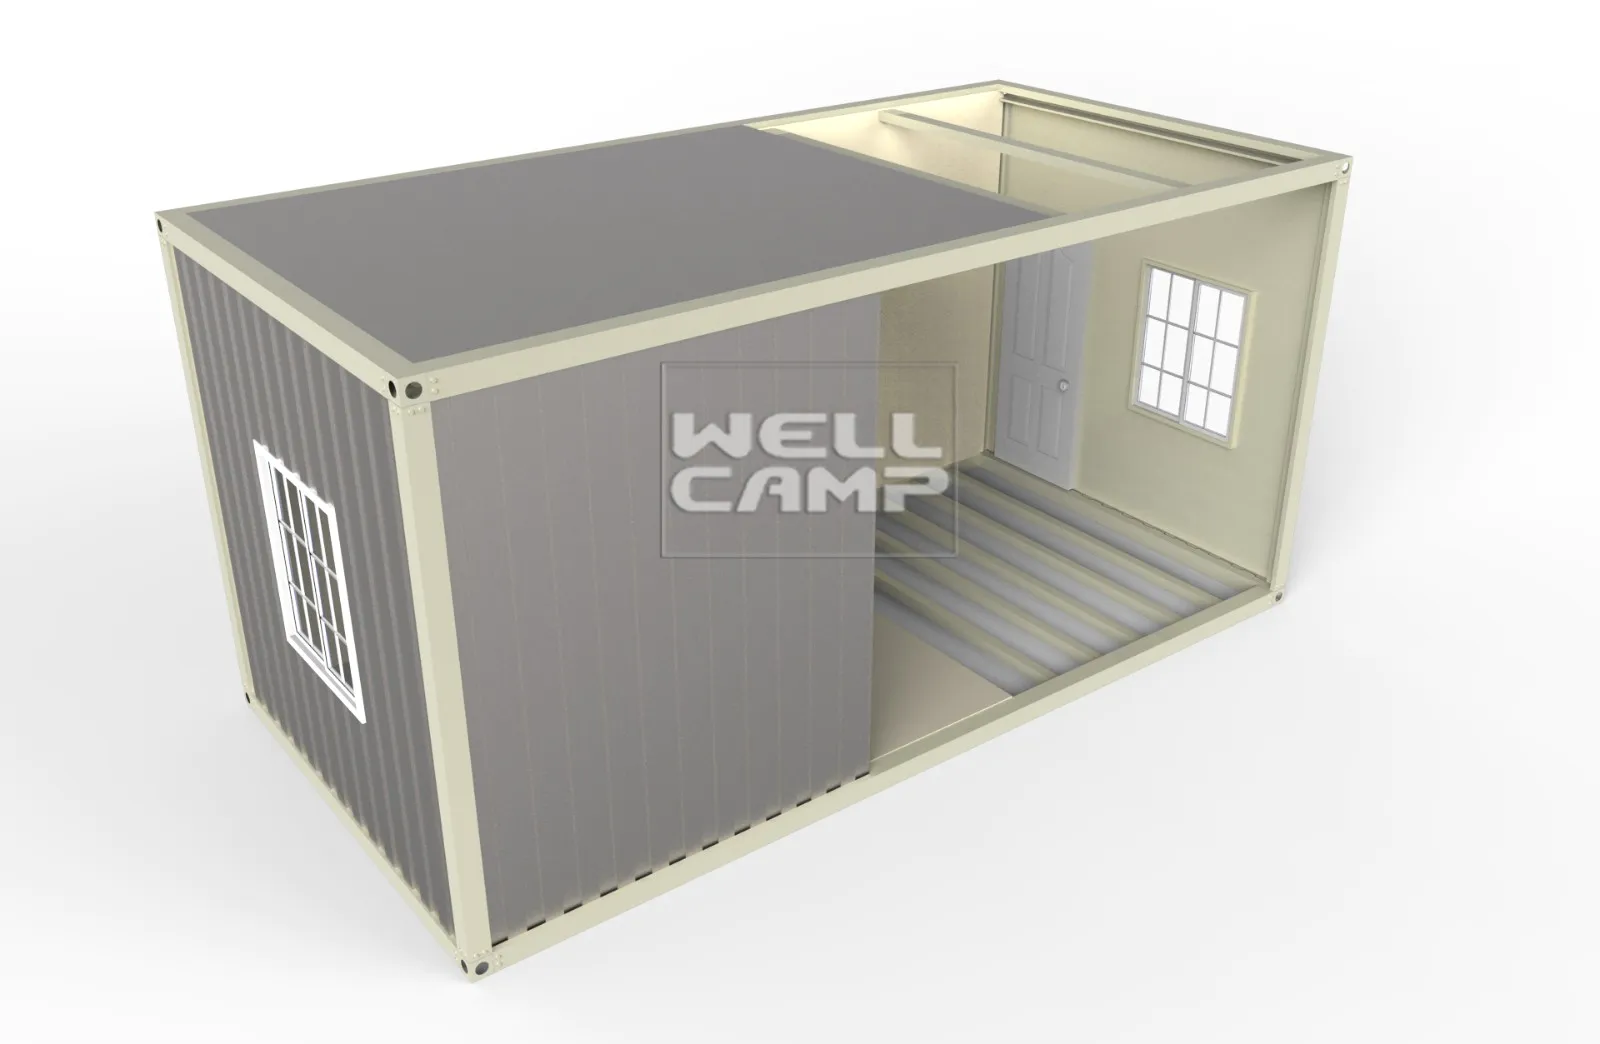 detachable prefabricated houses container for apartment